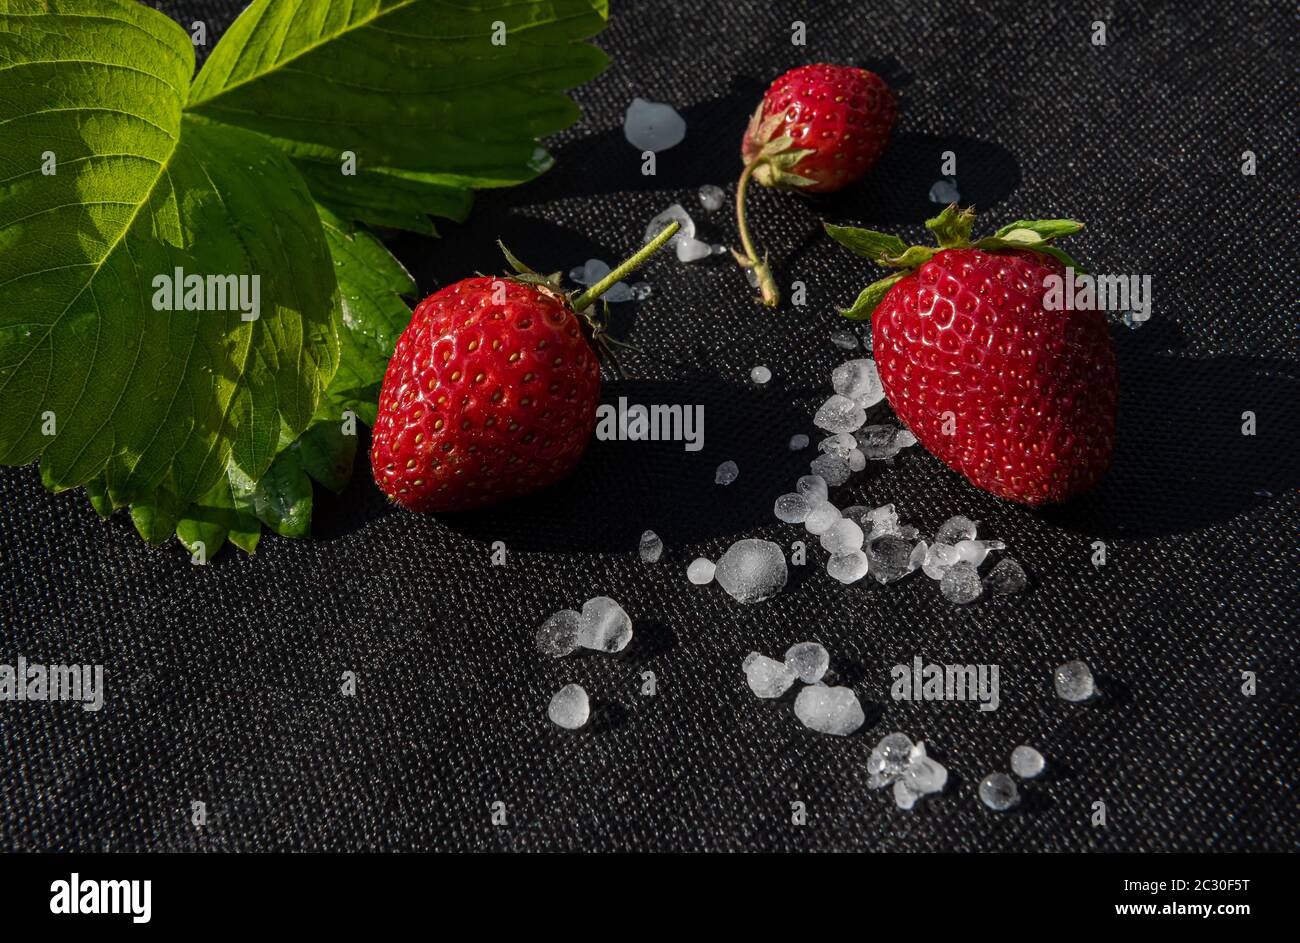 Red strawberries with few white hailstones and strawberry leaf on black textile material used for cultivating this berry in garden. Horizontal backgro Stock Photo